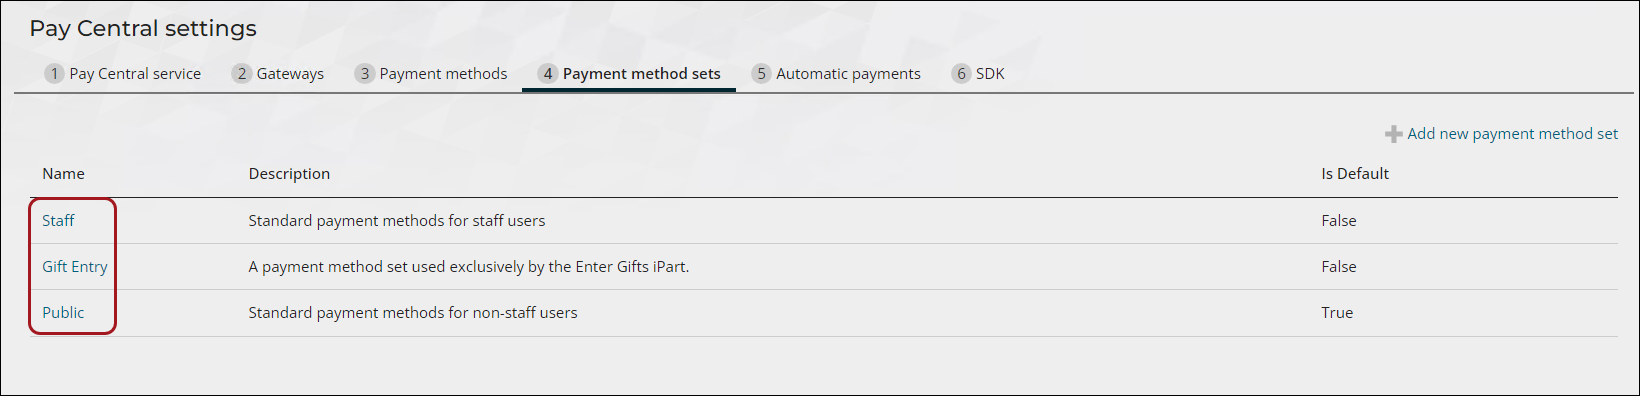 Showing the available payment method sets